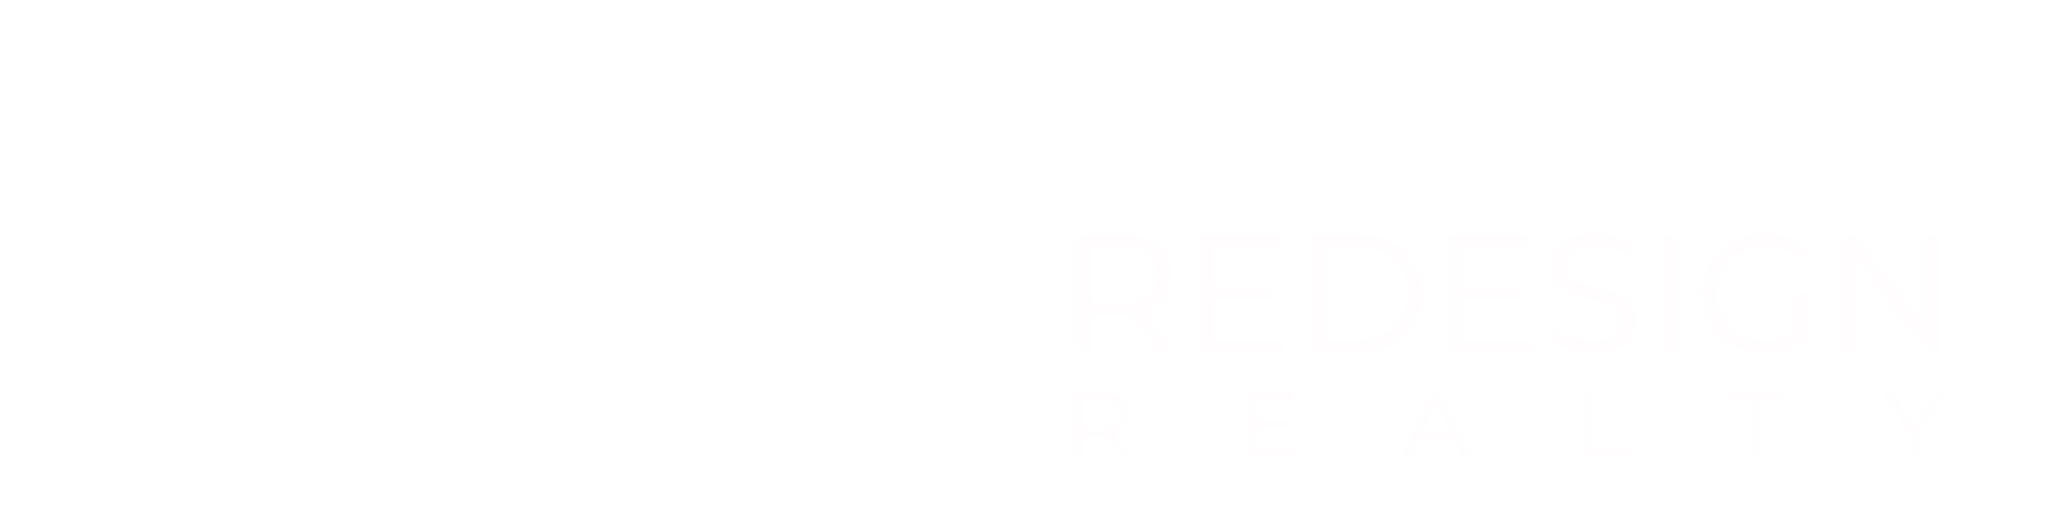 Redesign Realty